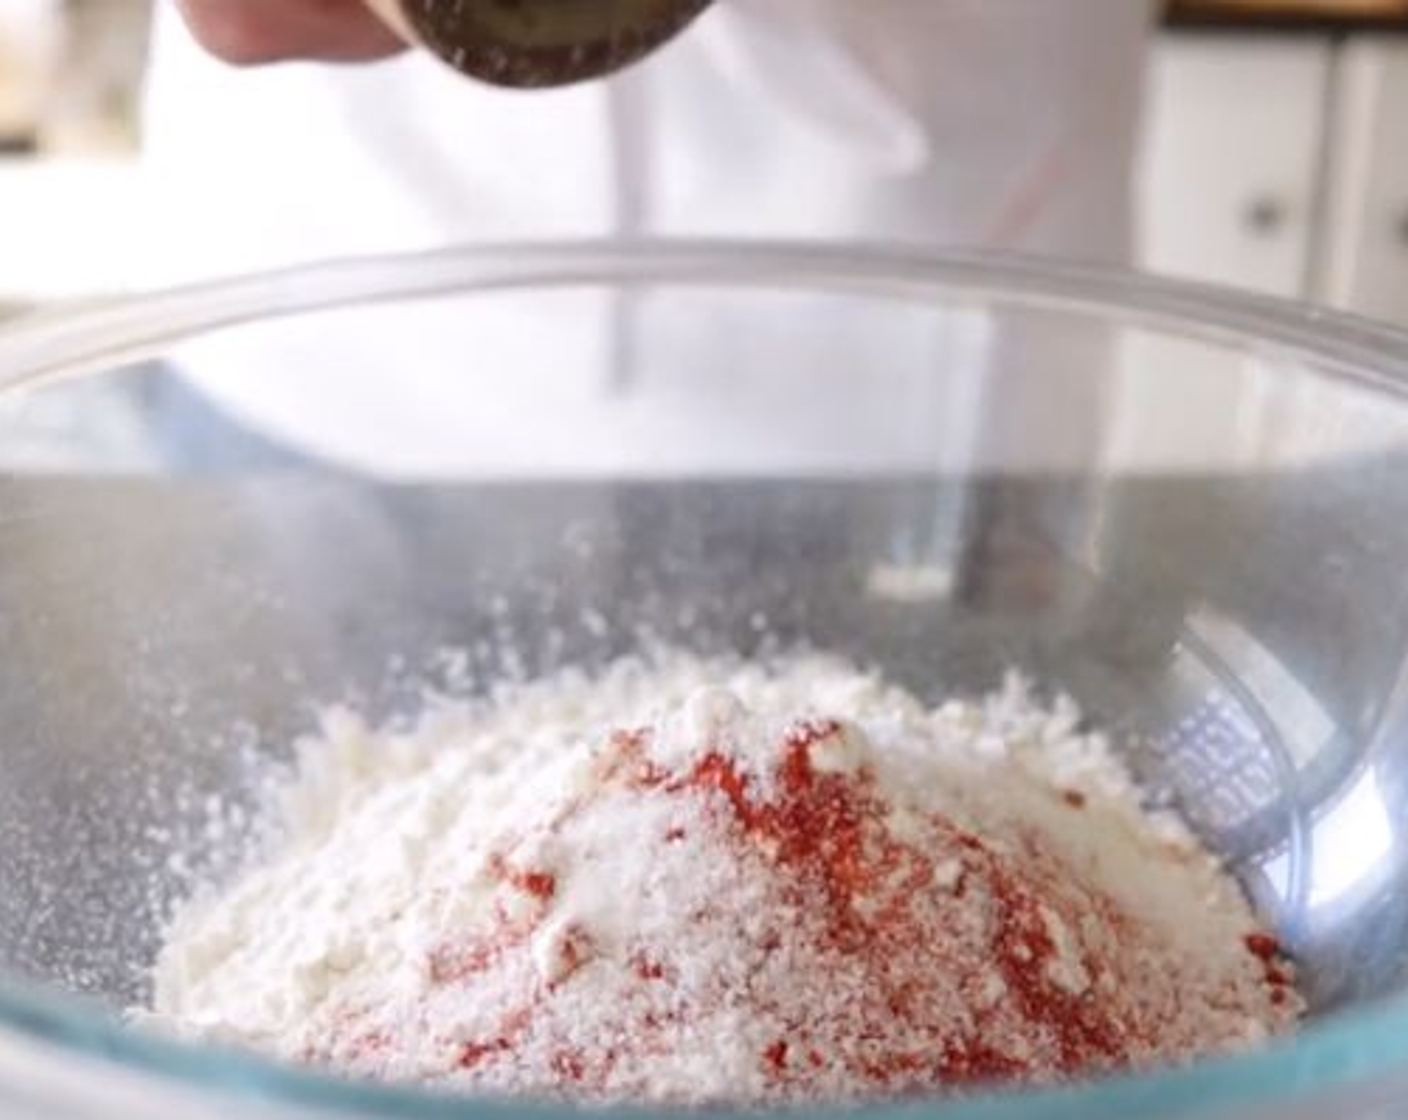 step 3 Add All-Purpose Flour (1 cup) into a separate bowl, along with Spanish Smoked Sweet Paprika (1 tsp), Sea Salt (1 tsp) and some Freshly Ground Black Pepper (1/2 tsp). Mix together until well combined.